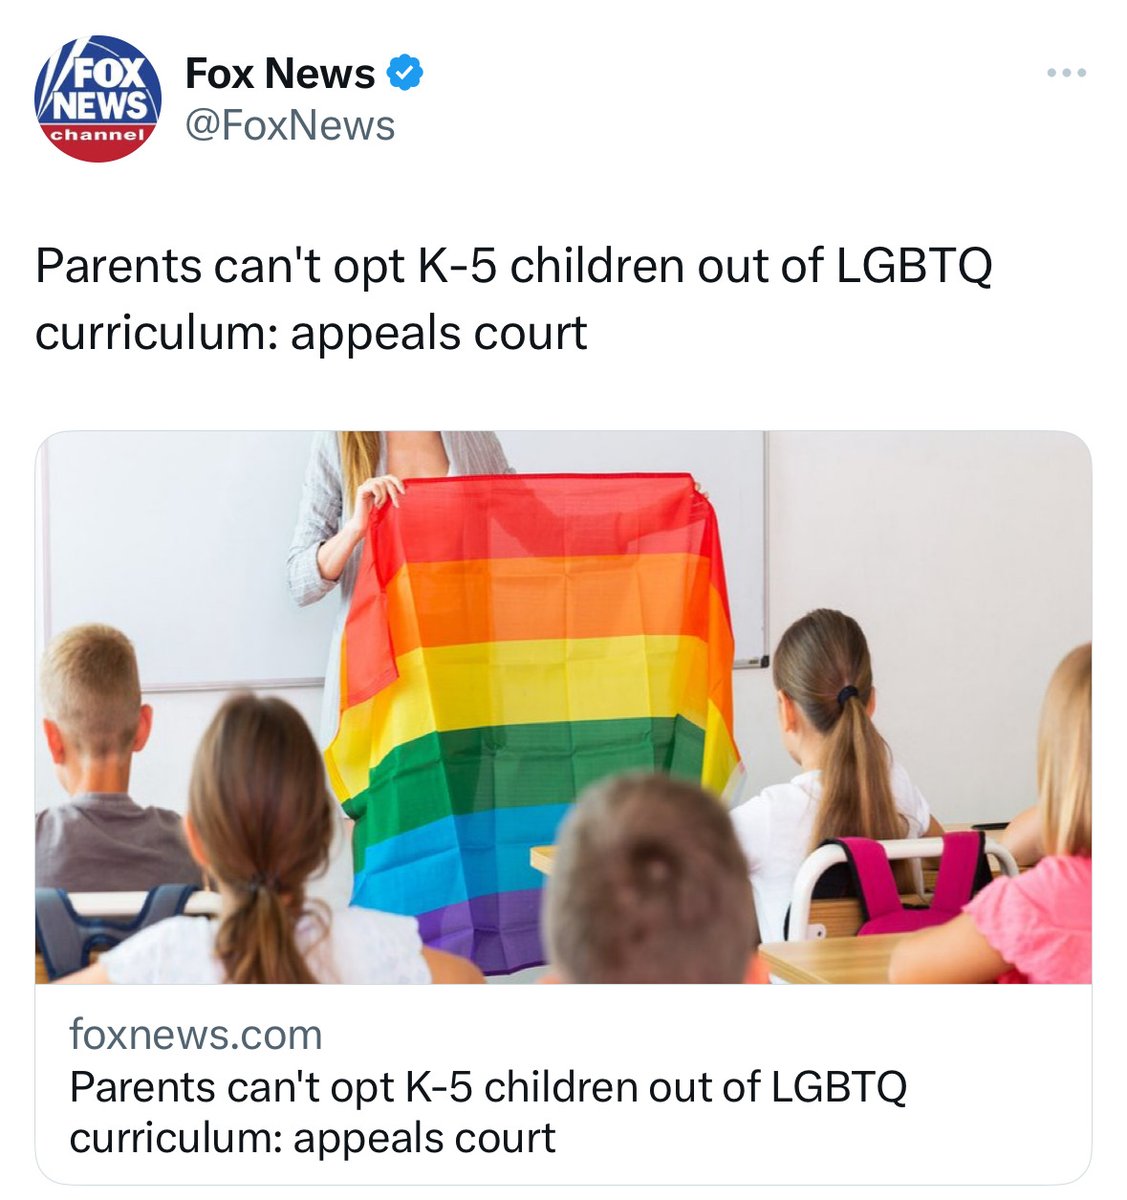 Two articles published on the same day. The UK moves to protect kids and uphold parental rights; The US moves to indoctrinate kids and violate parental rights.